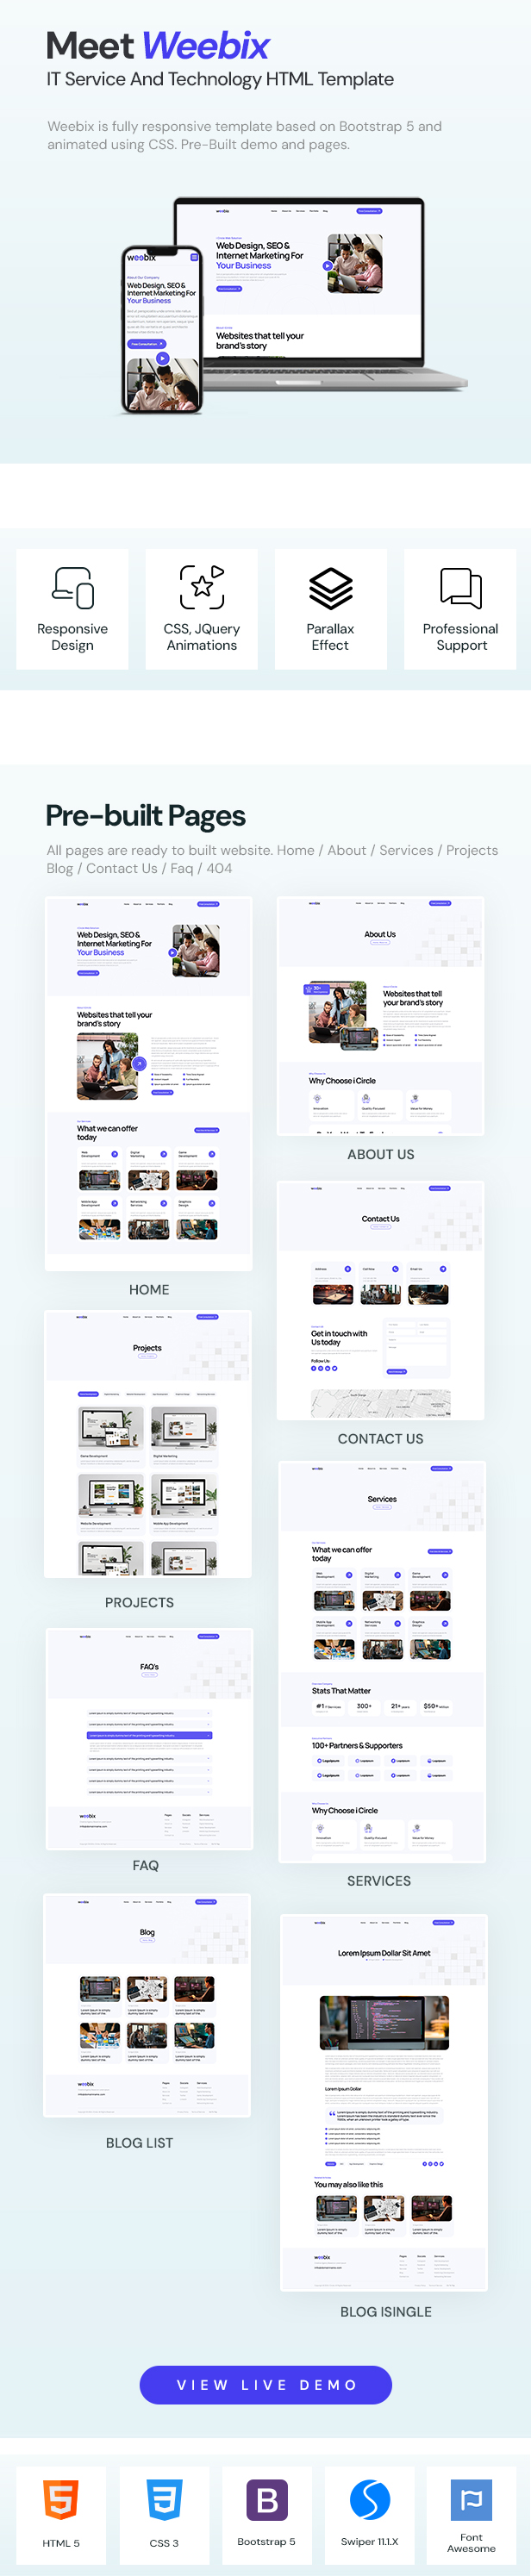 Weebix - IT Service And Technology HTML Template - 1